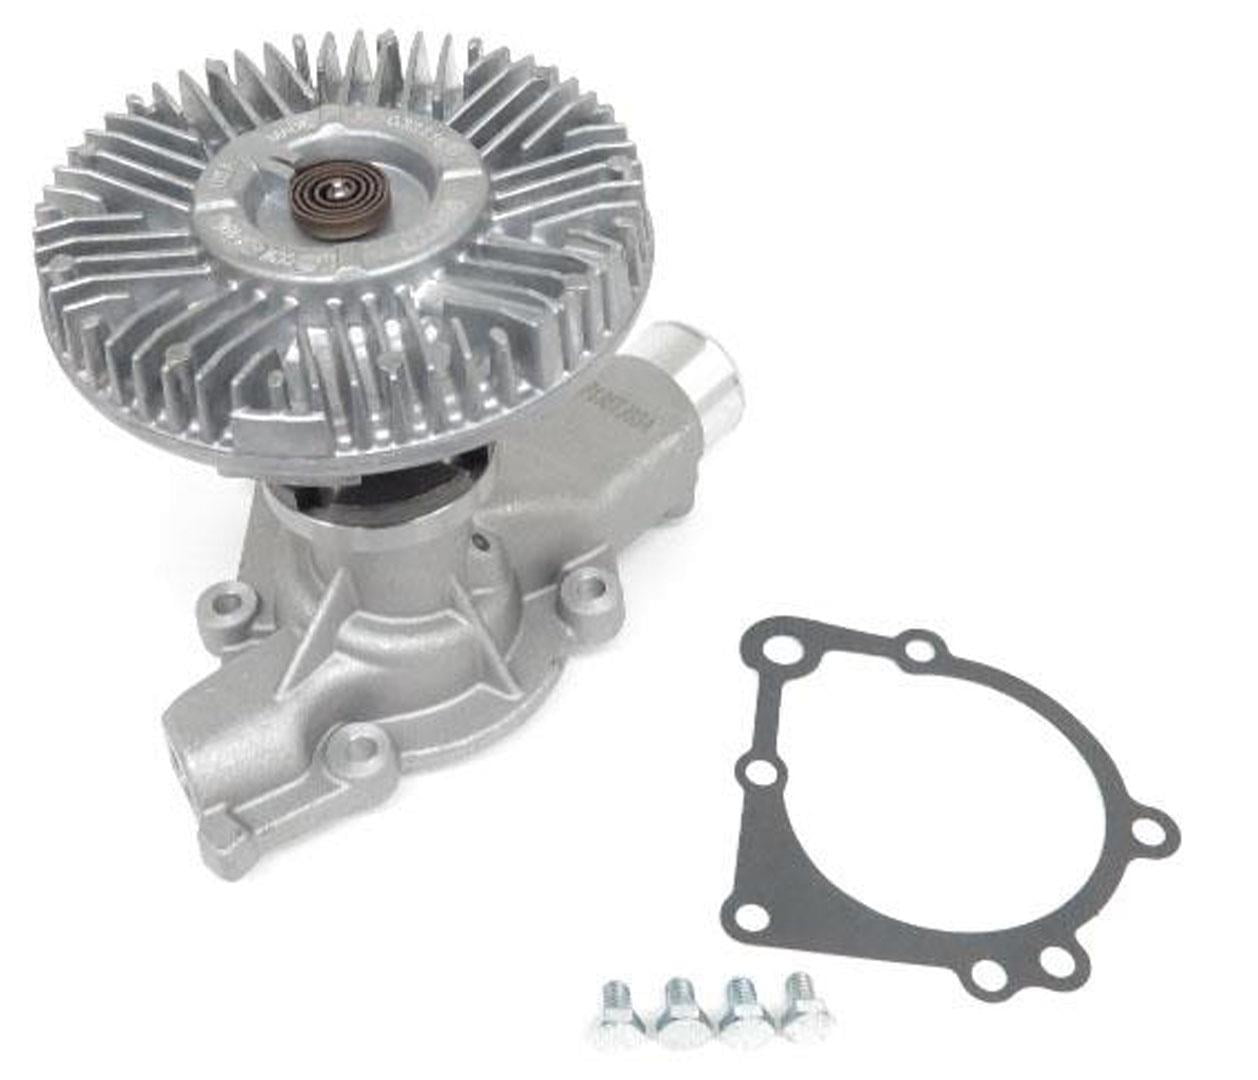 New Tested Water Pump & Fan Clutch Fits For Jeep Wrangler  1991-1999 -  